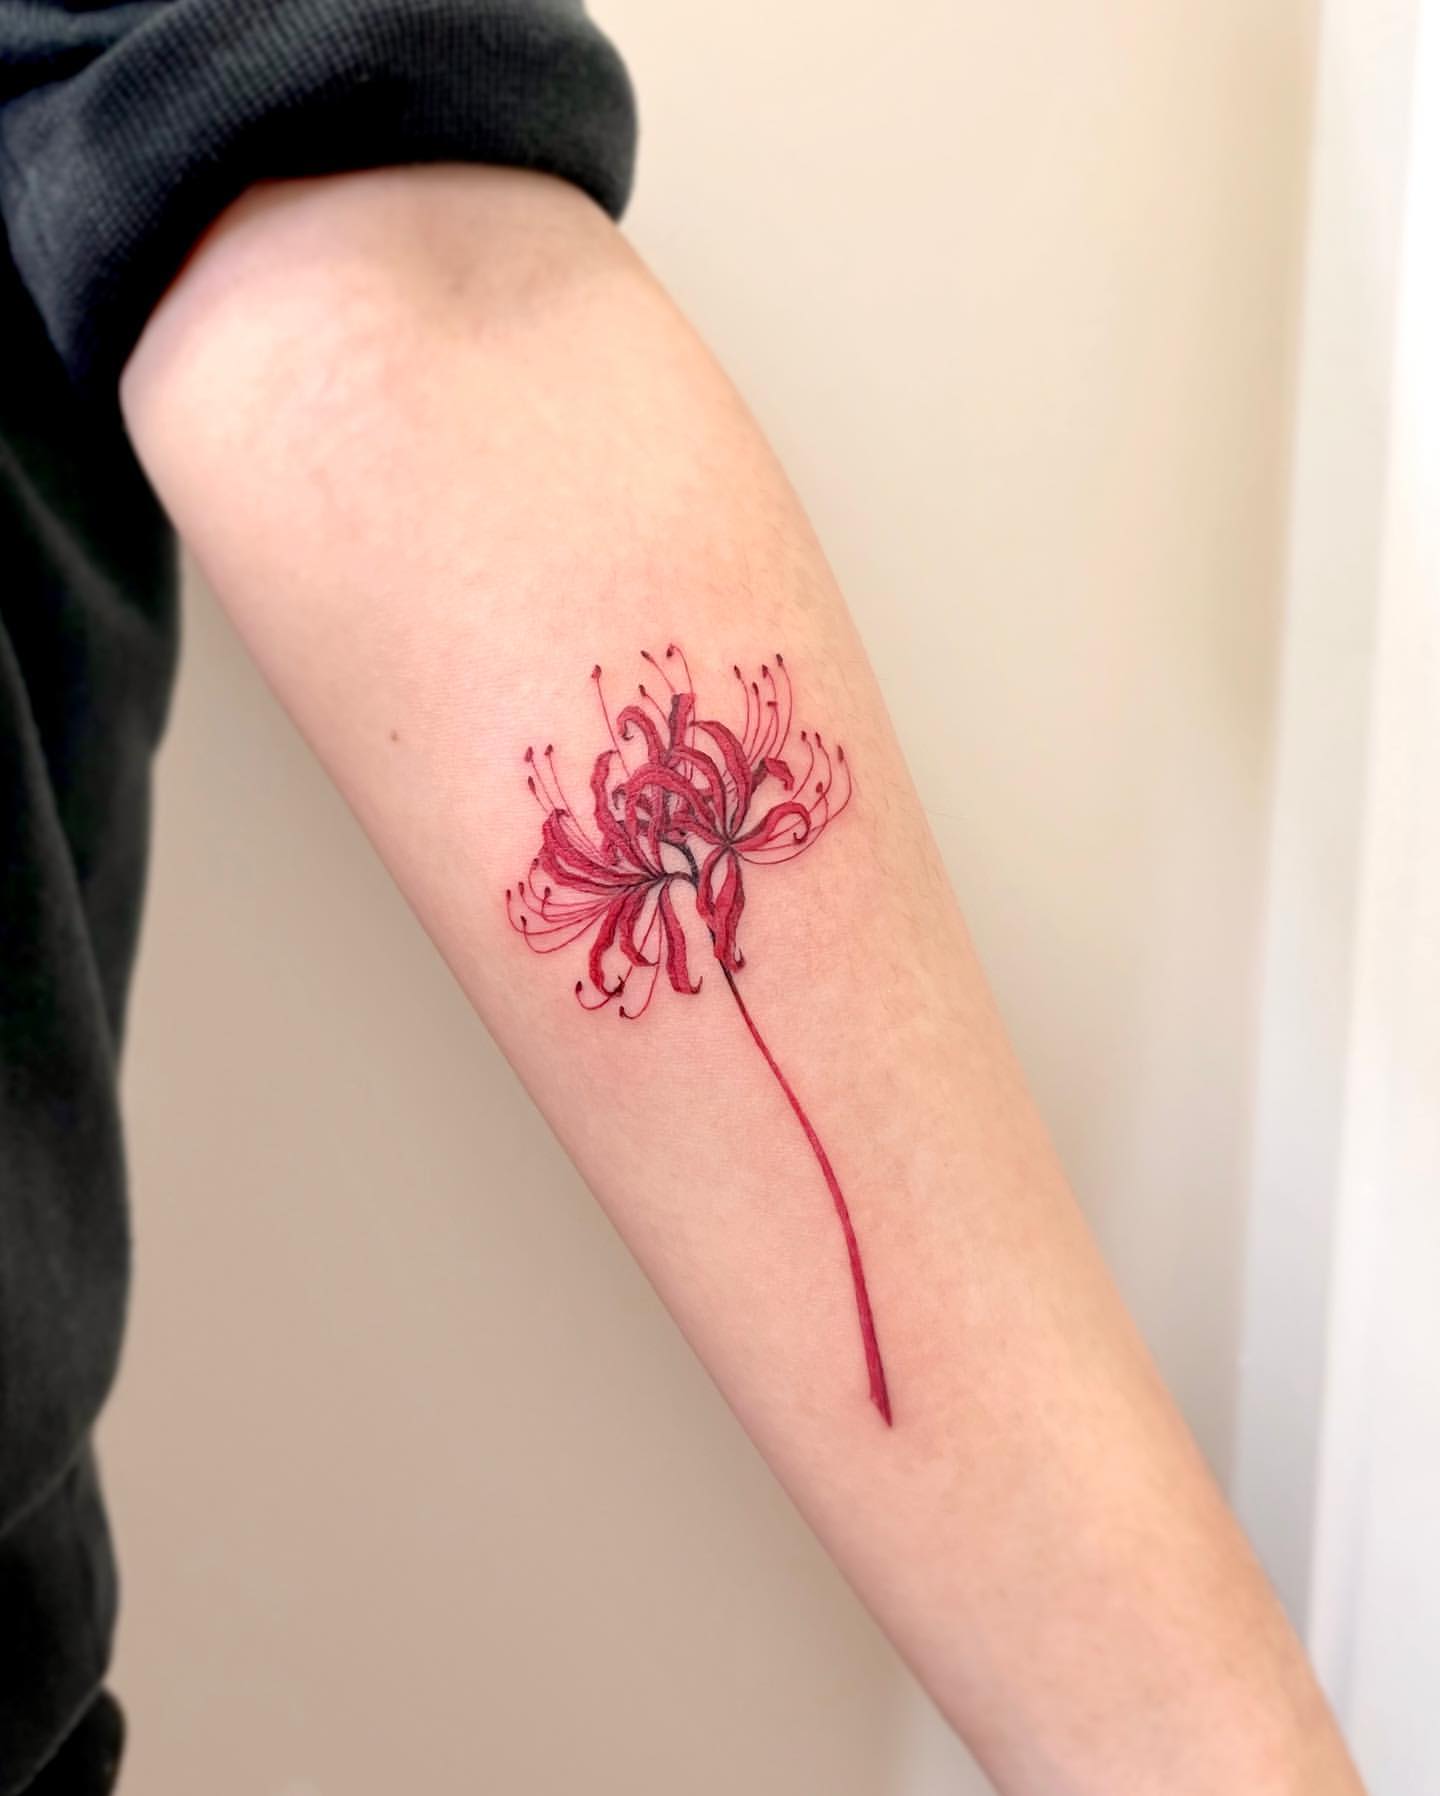 34 Spider Lily Tattoo Ideas to Inspire You in 2023